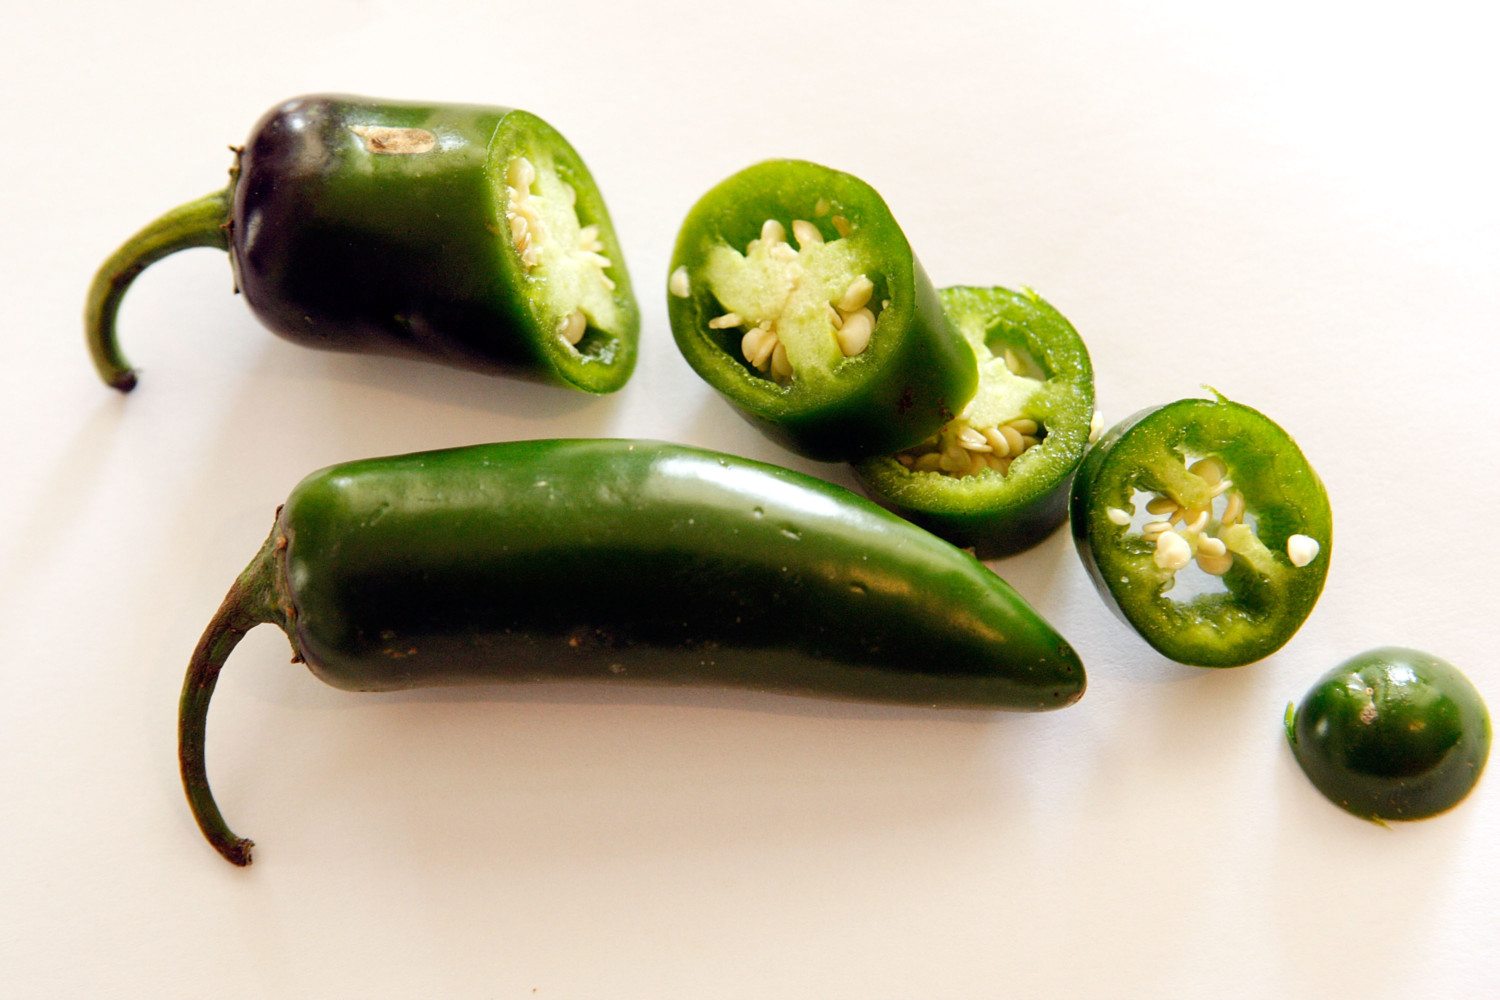 FDA Issues Warnings On Jalapenos, After Salmonella Found In Pepper